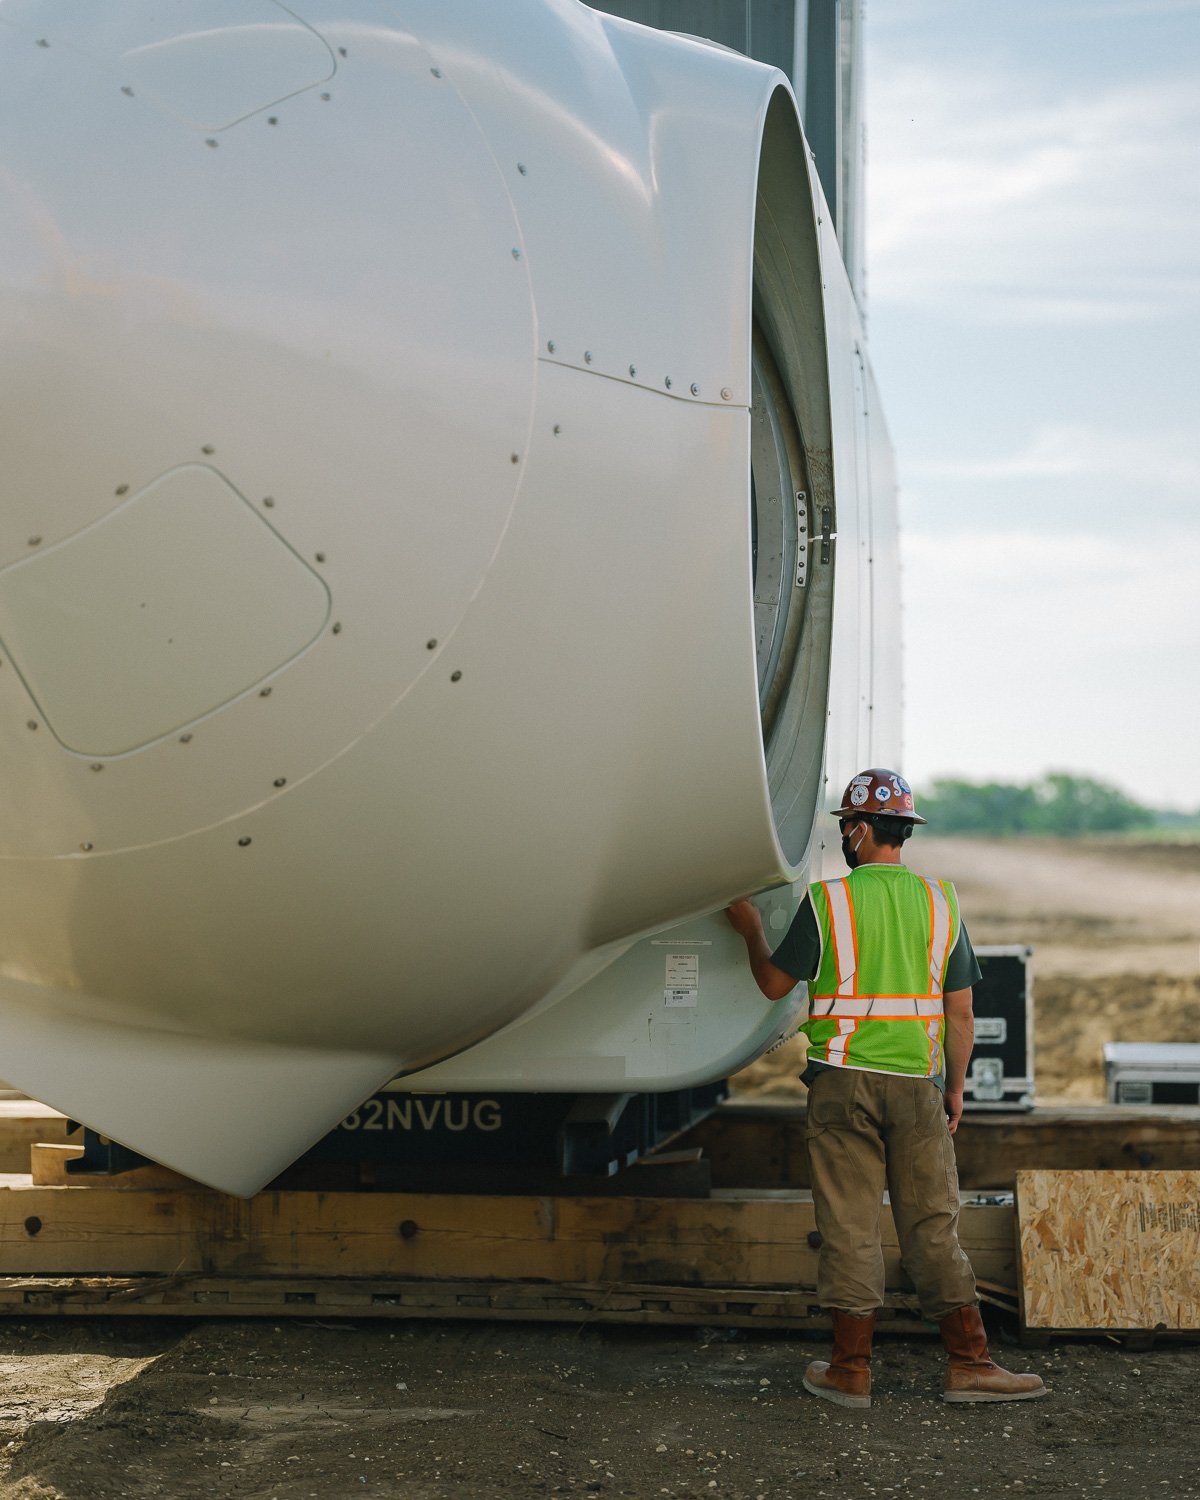  A worker inspects the head of a new wind turbine as it sits on the ground at the Milligan 1 Wind Farm Project, Western, NE, for The New York Times, 2020 